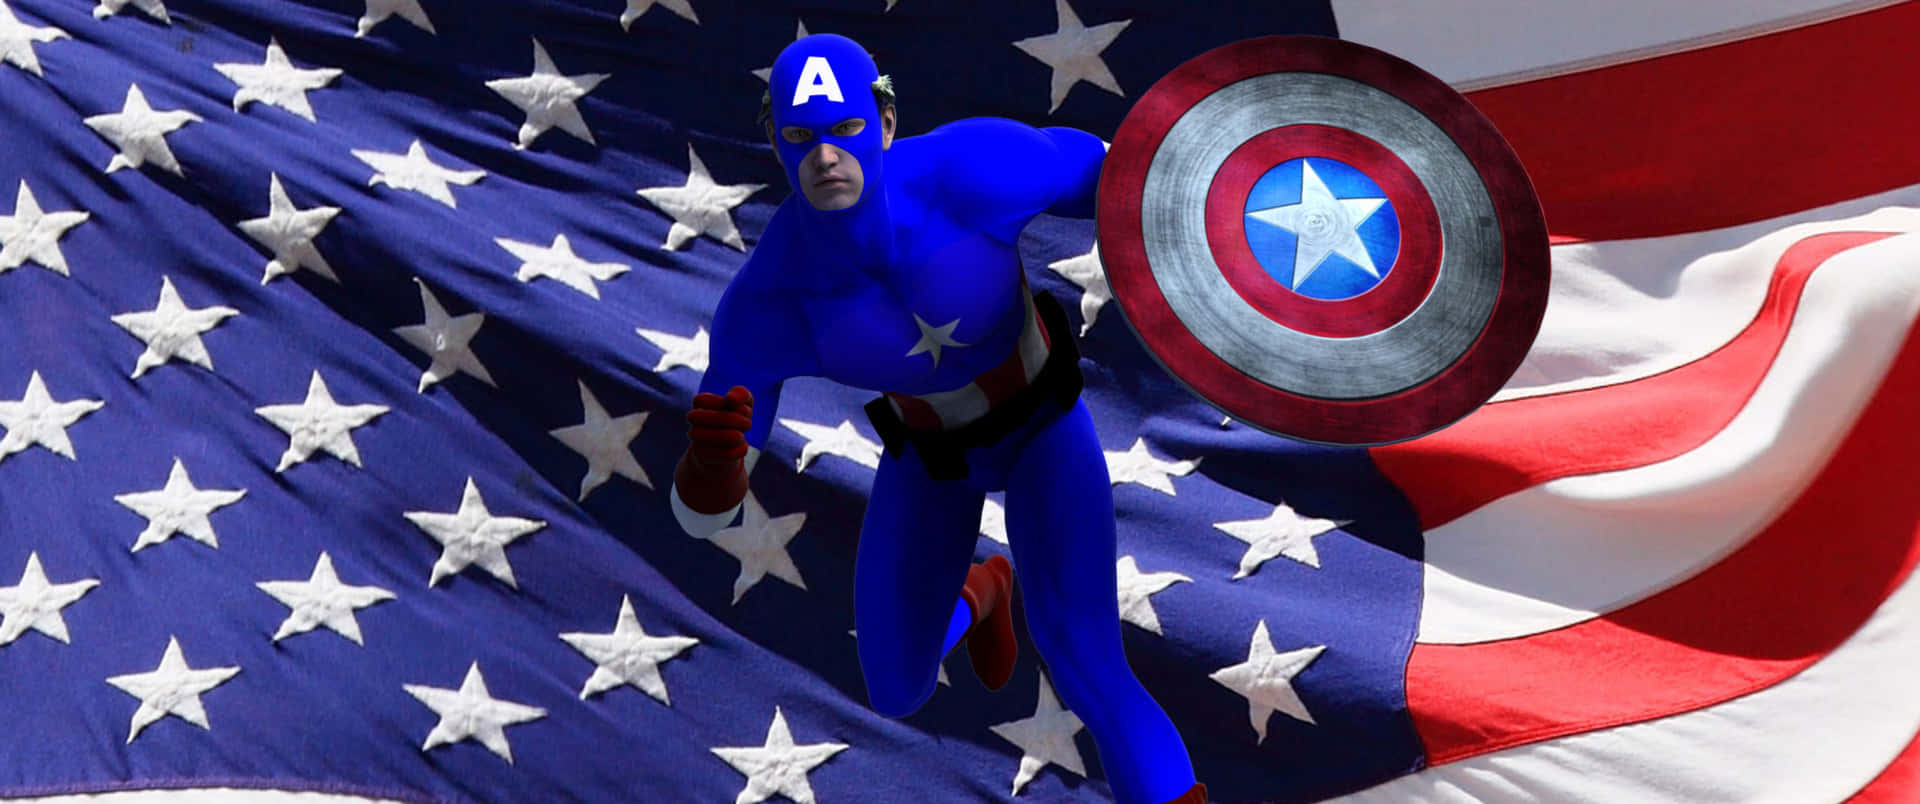 The Ultimate Patriot - Captain America in Action